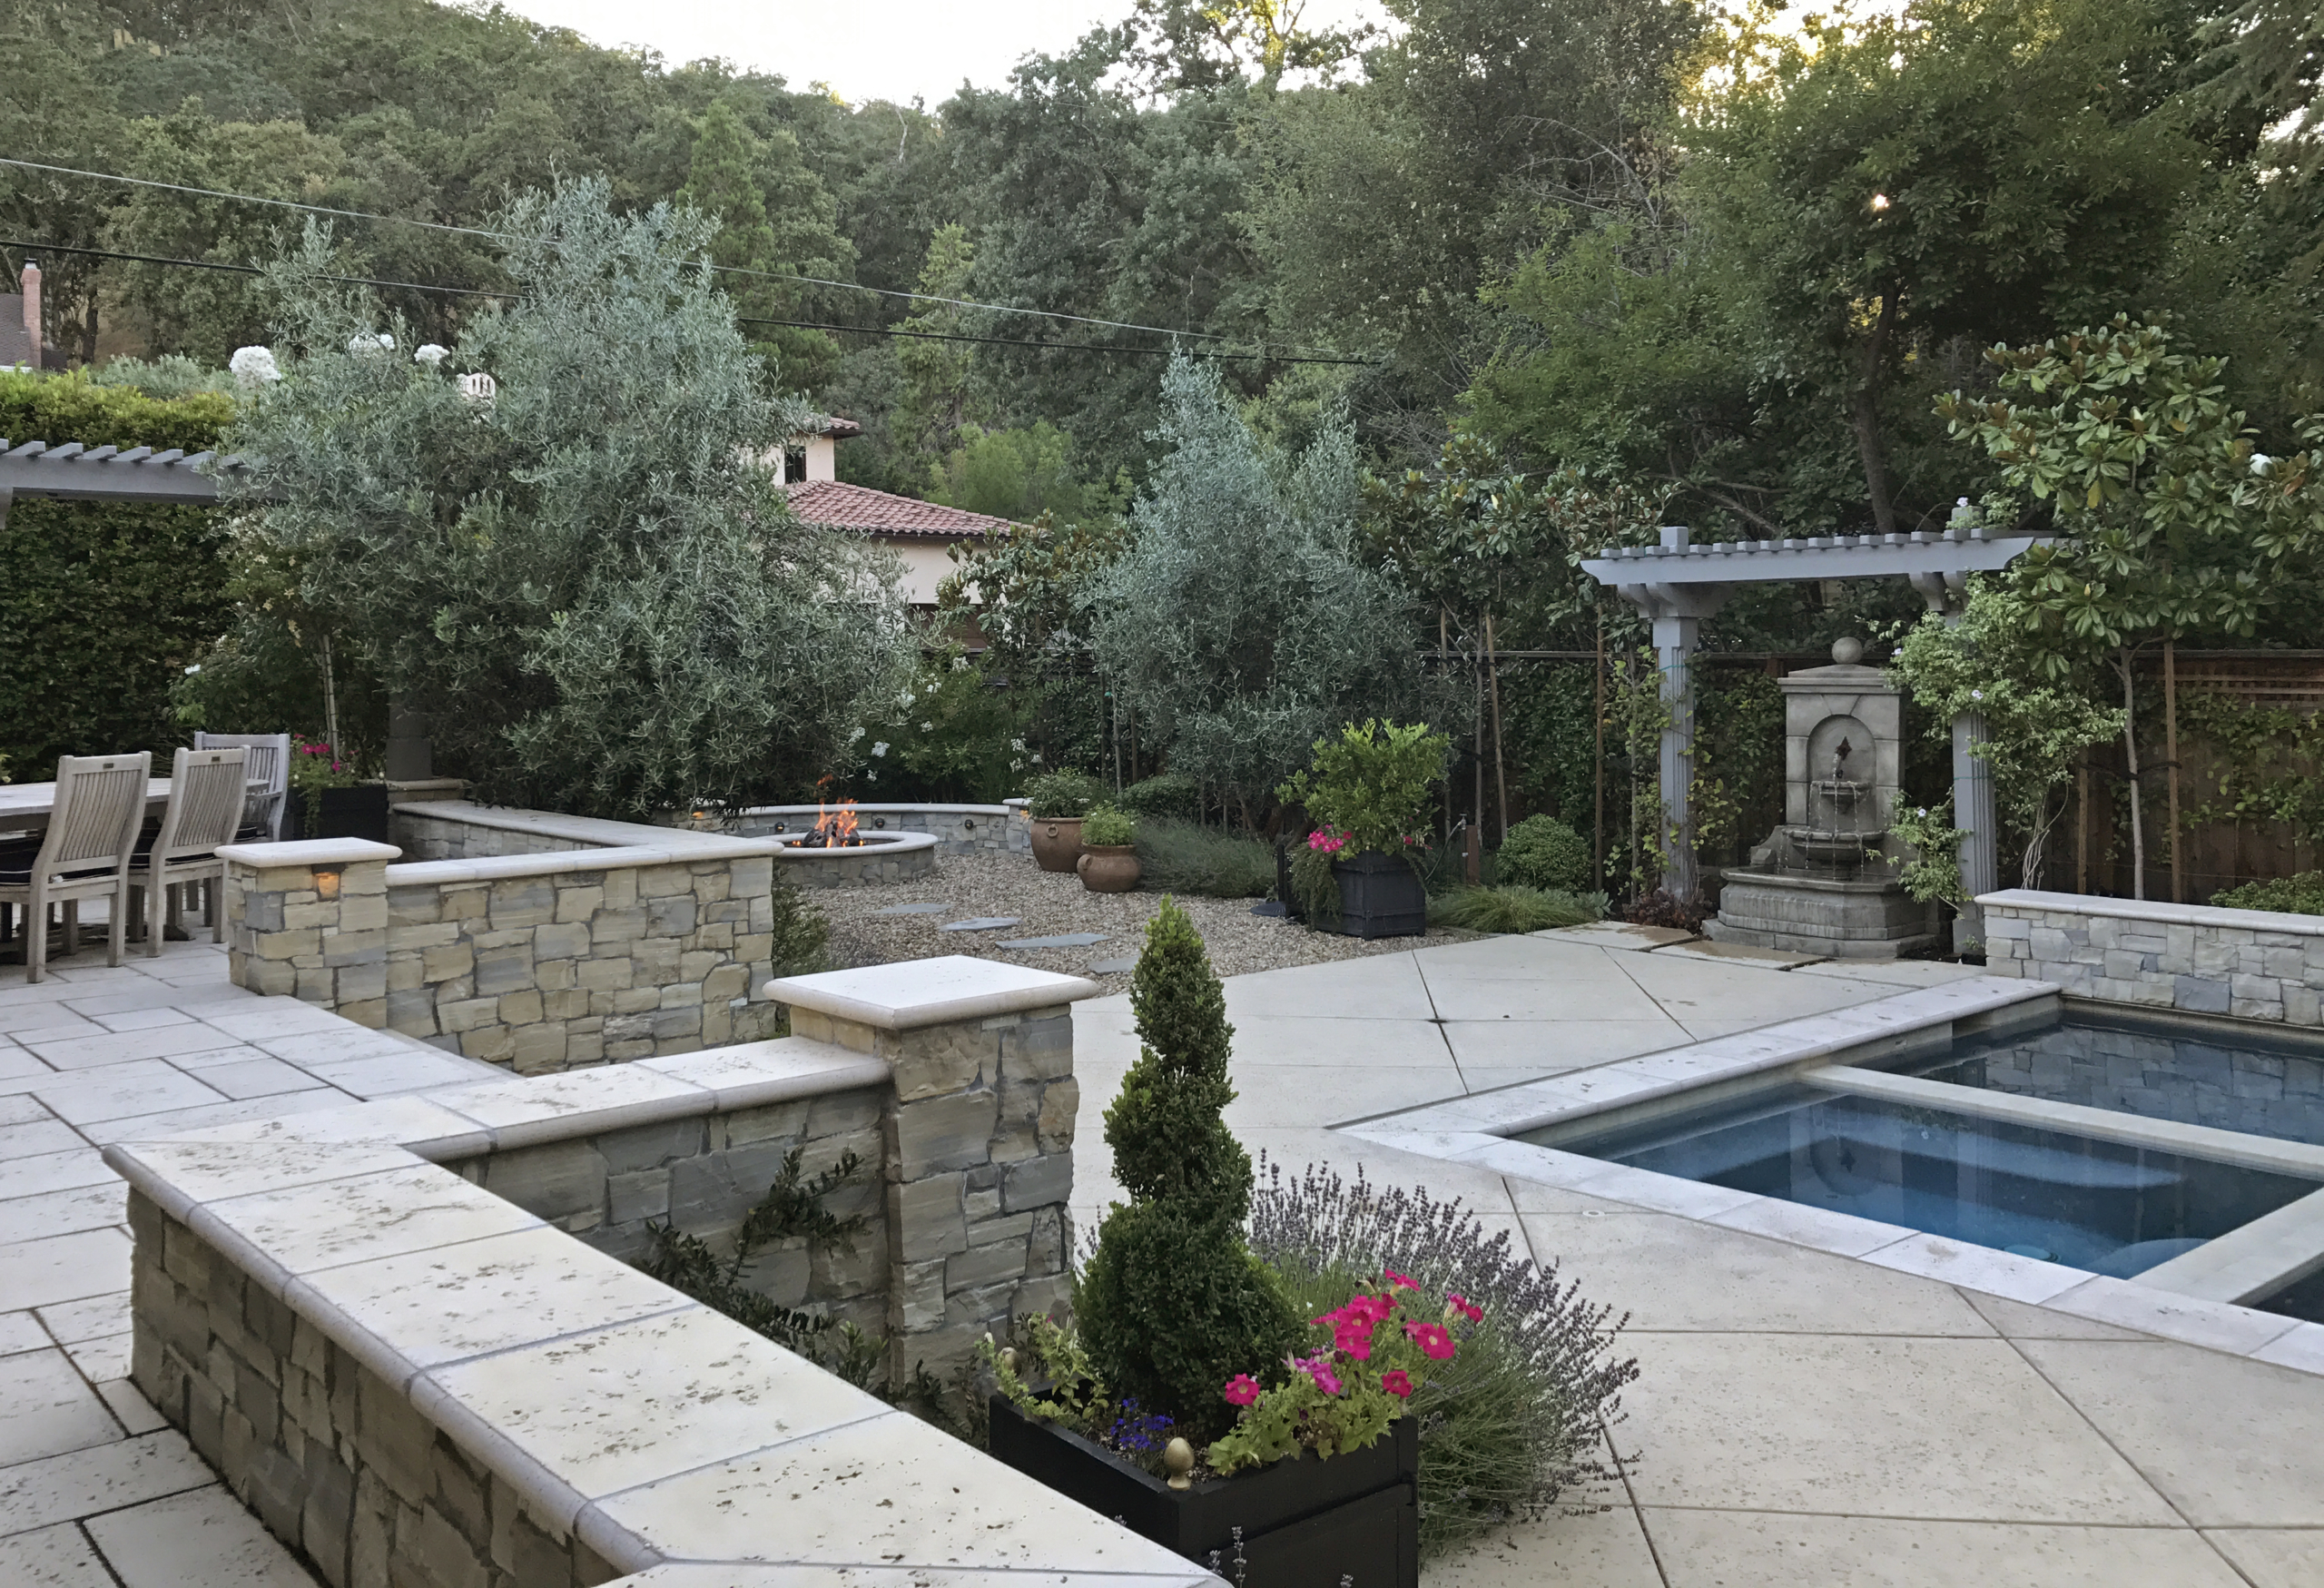 Travertine pavers and walls in a Mediterranean style landscape